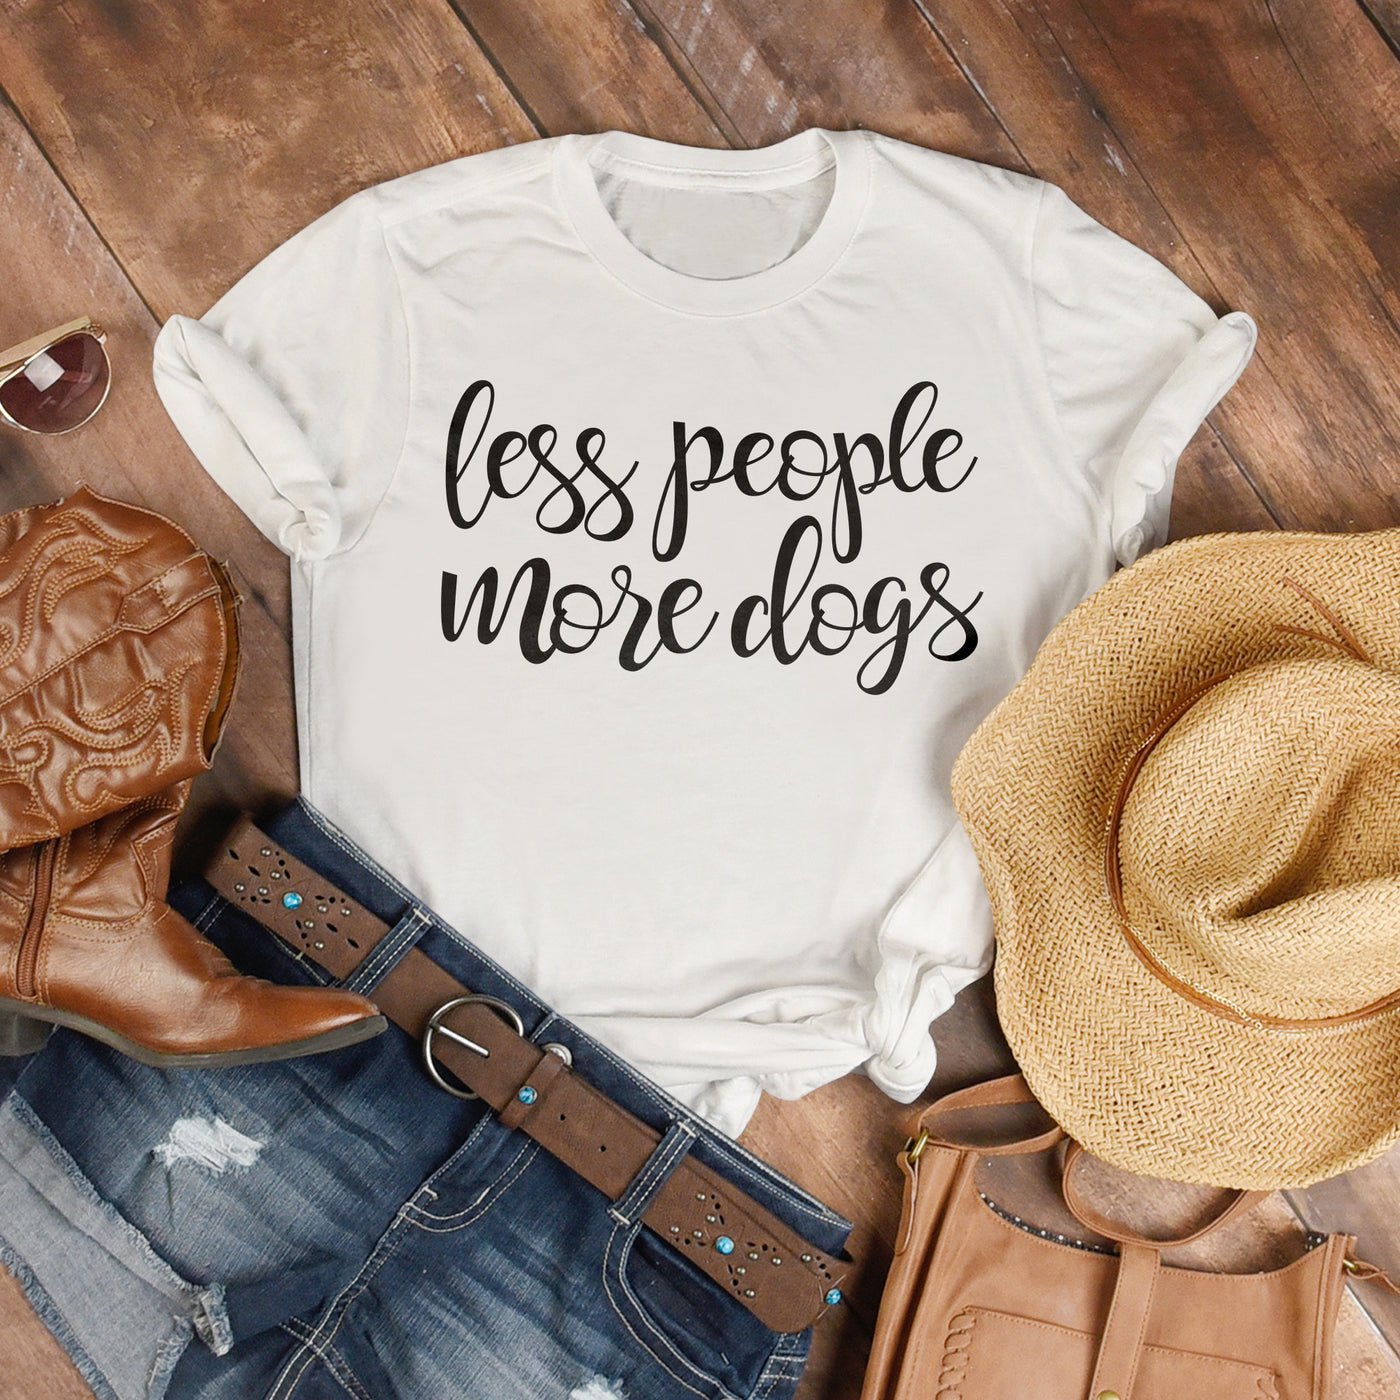 Less People More Dogs Version 2 T-Shirt - Rocking The Dog Mom Life